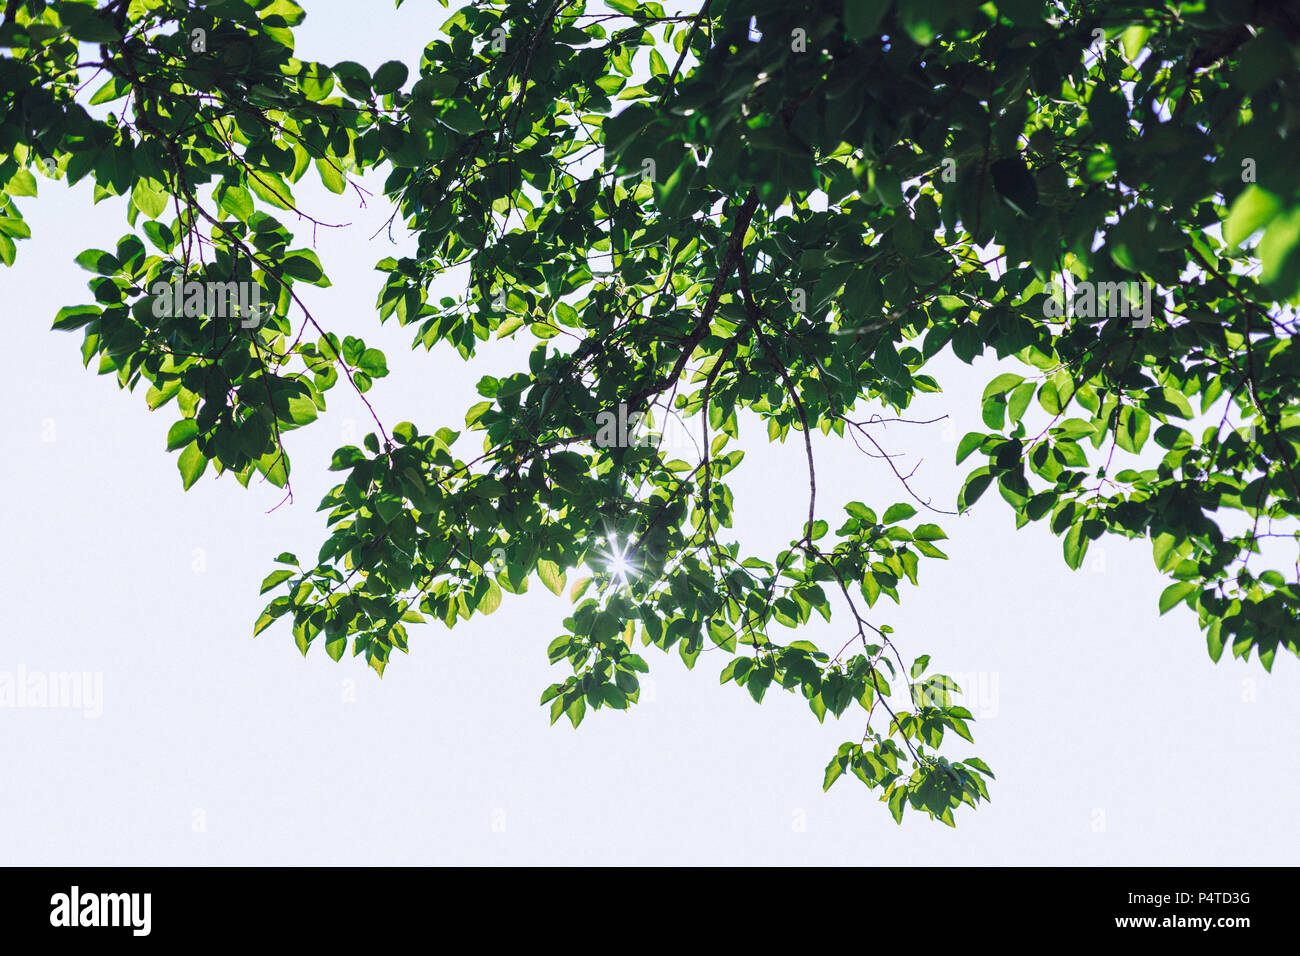 Tree with green leafs and sun shining through leaves Stock Photo